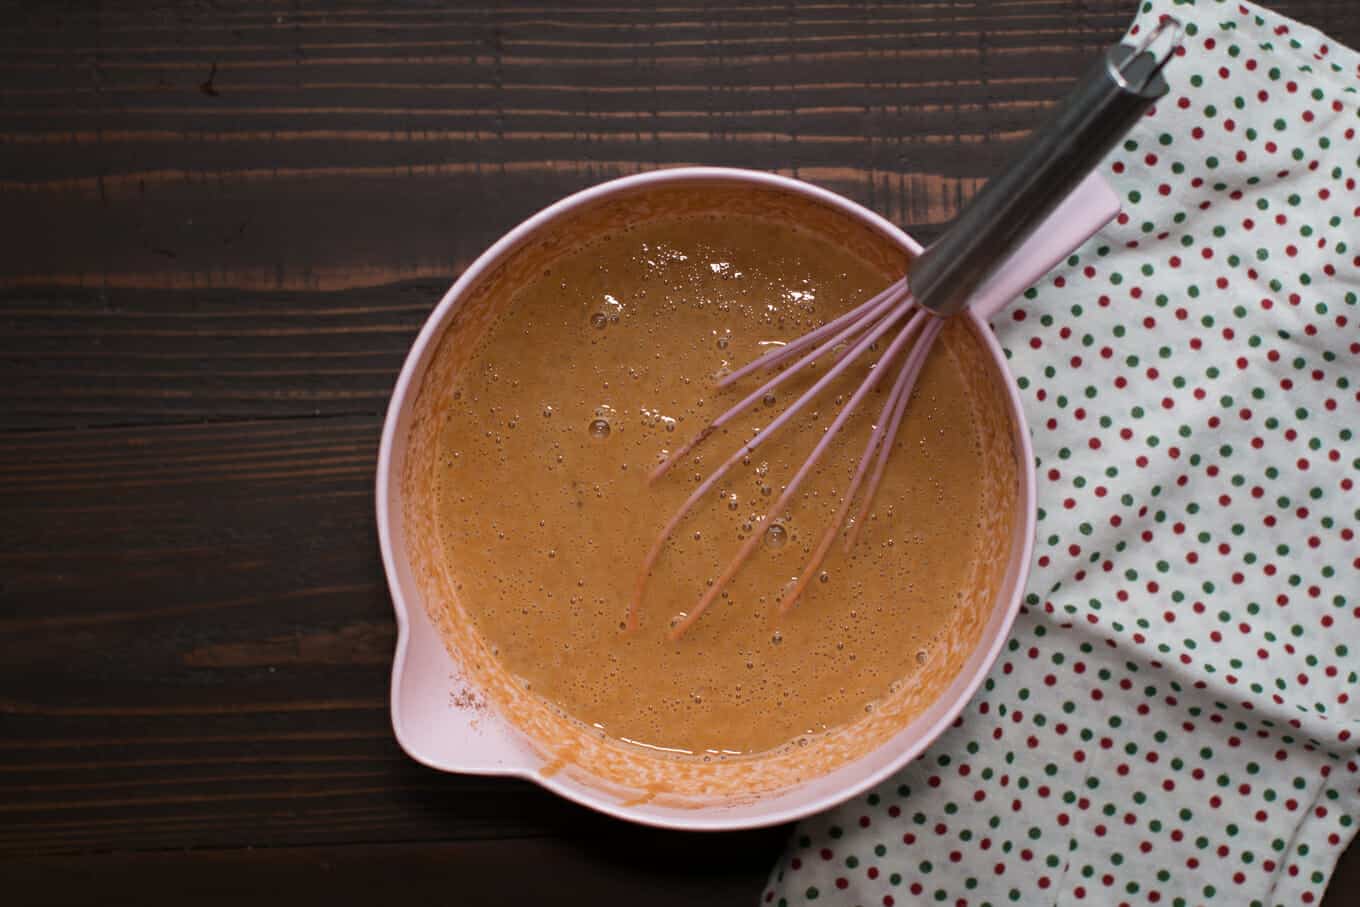 pumpkin pie filling in a pink bowl with a pink whisk in it.